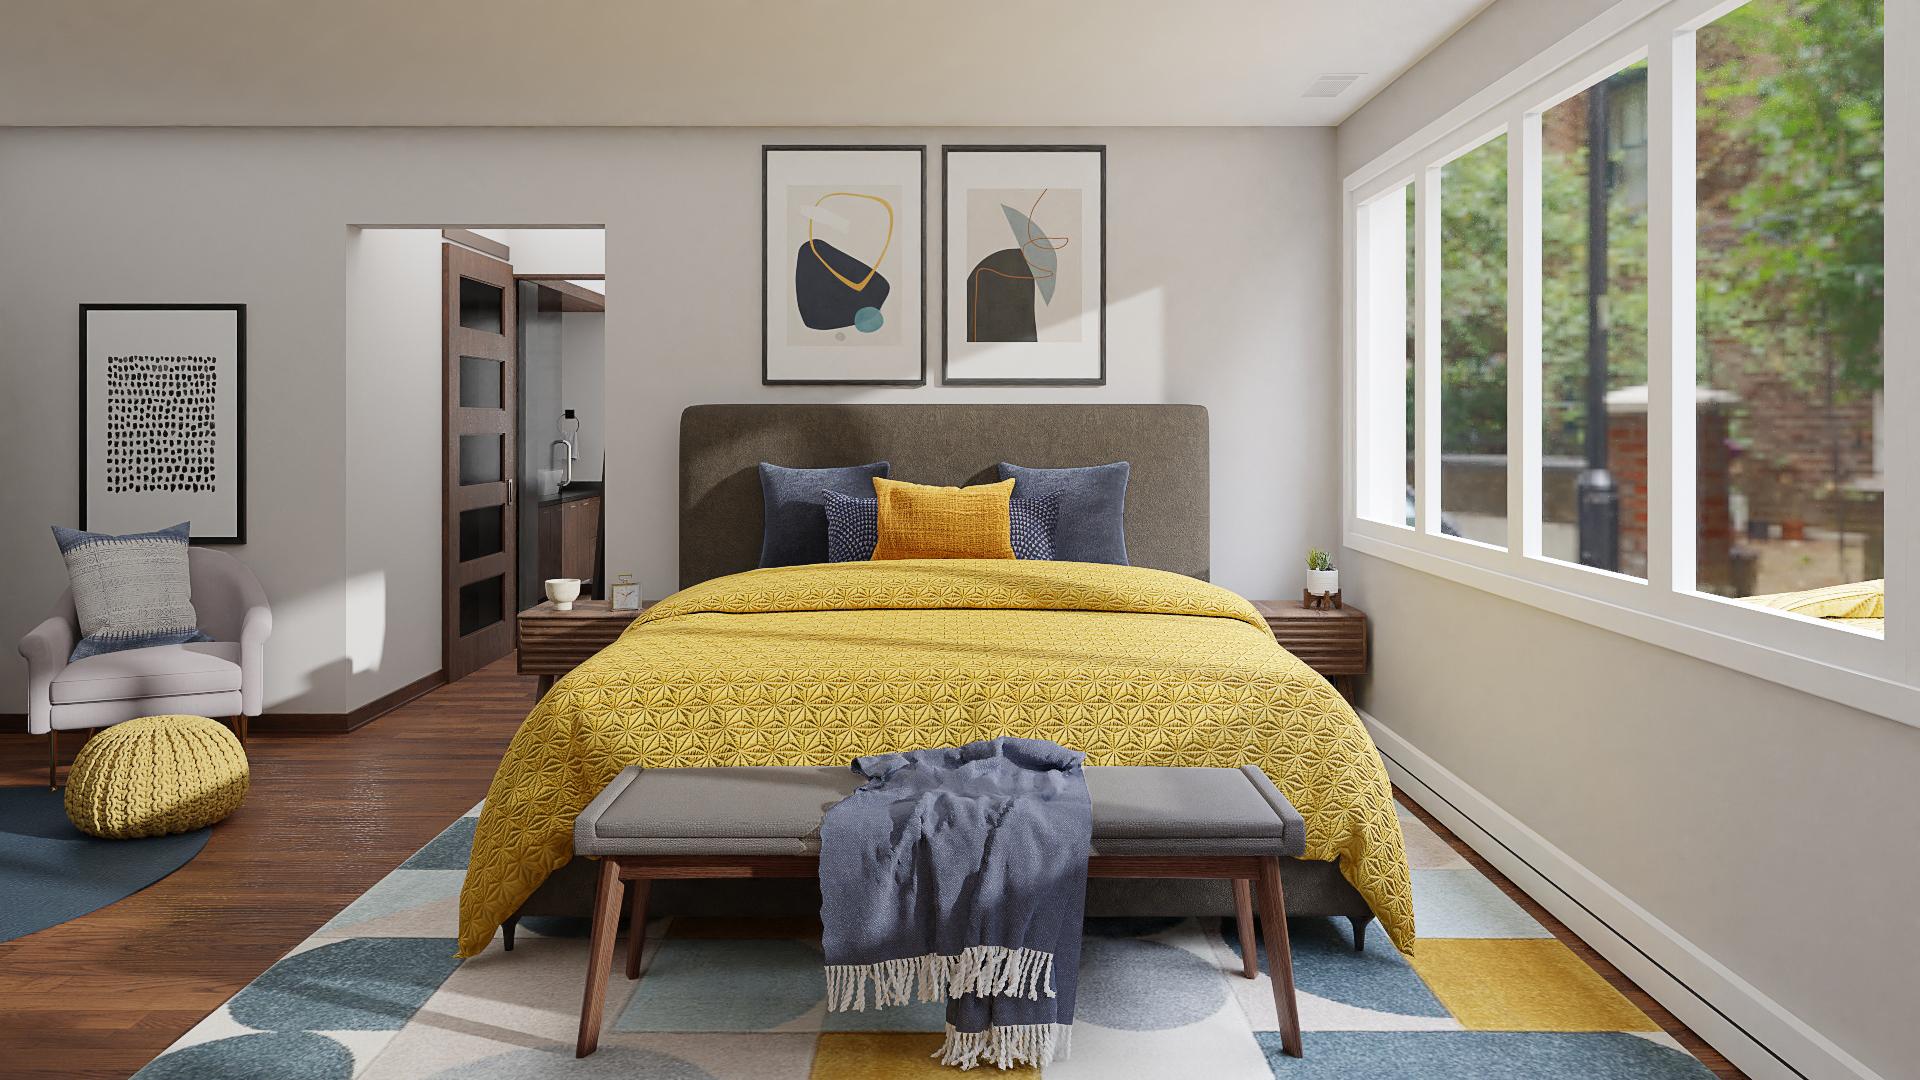 A Ray Of Sunshine In This Mid-Century Modern Bedroom